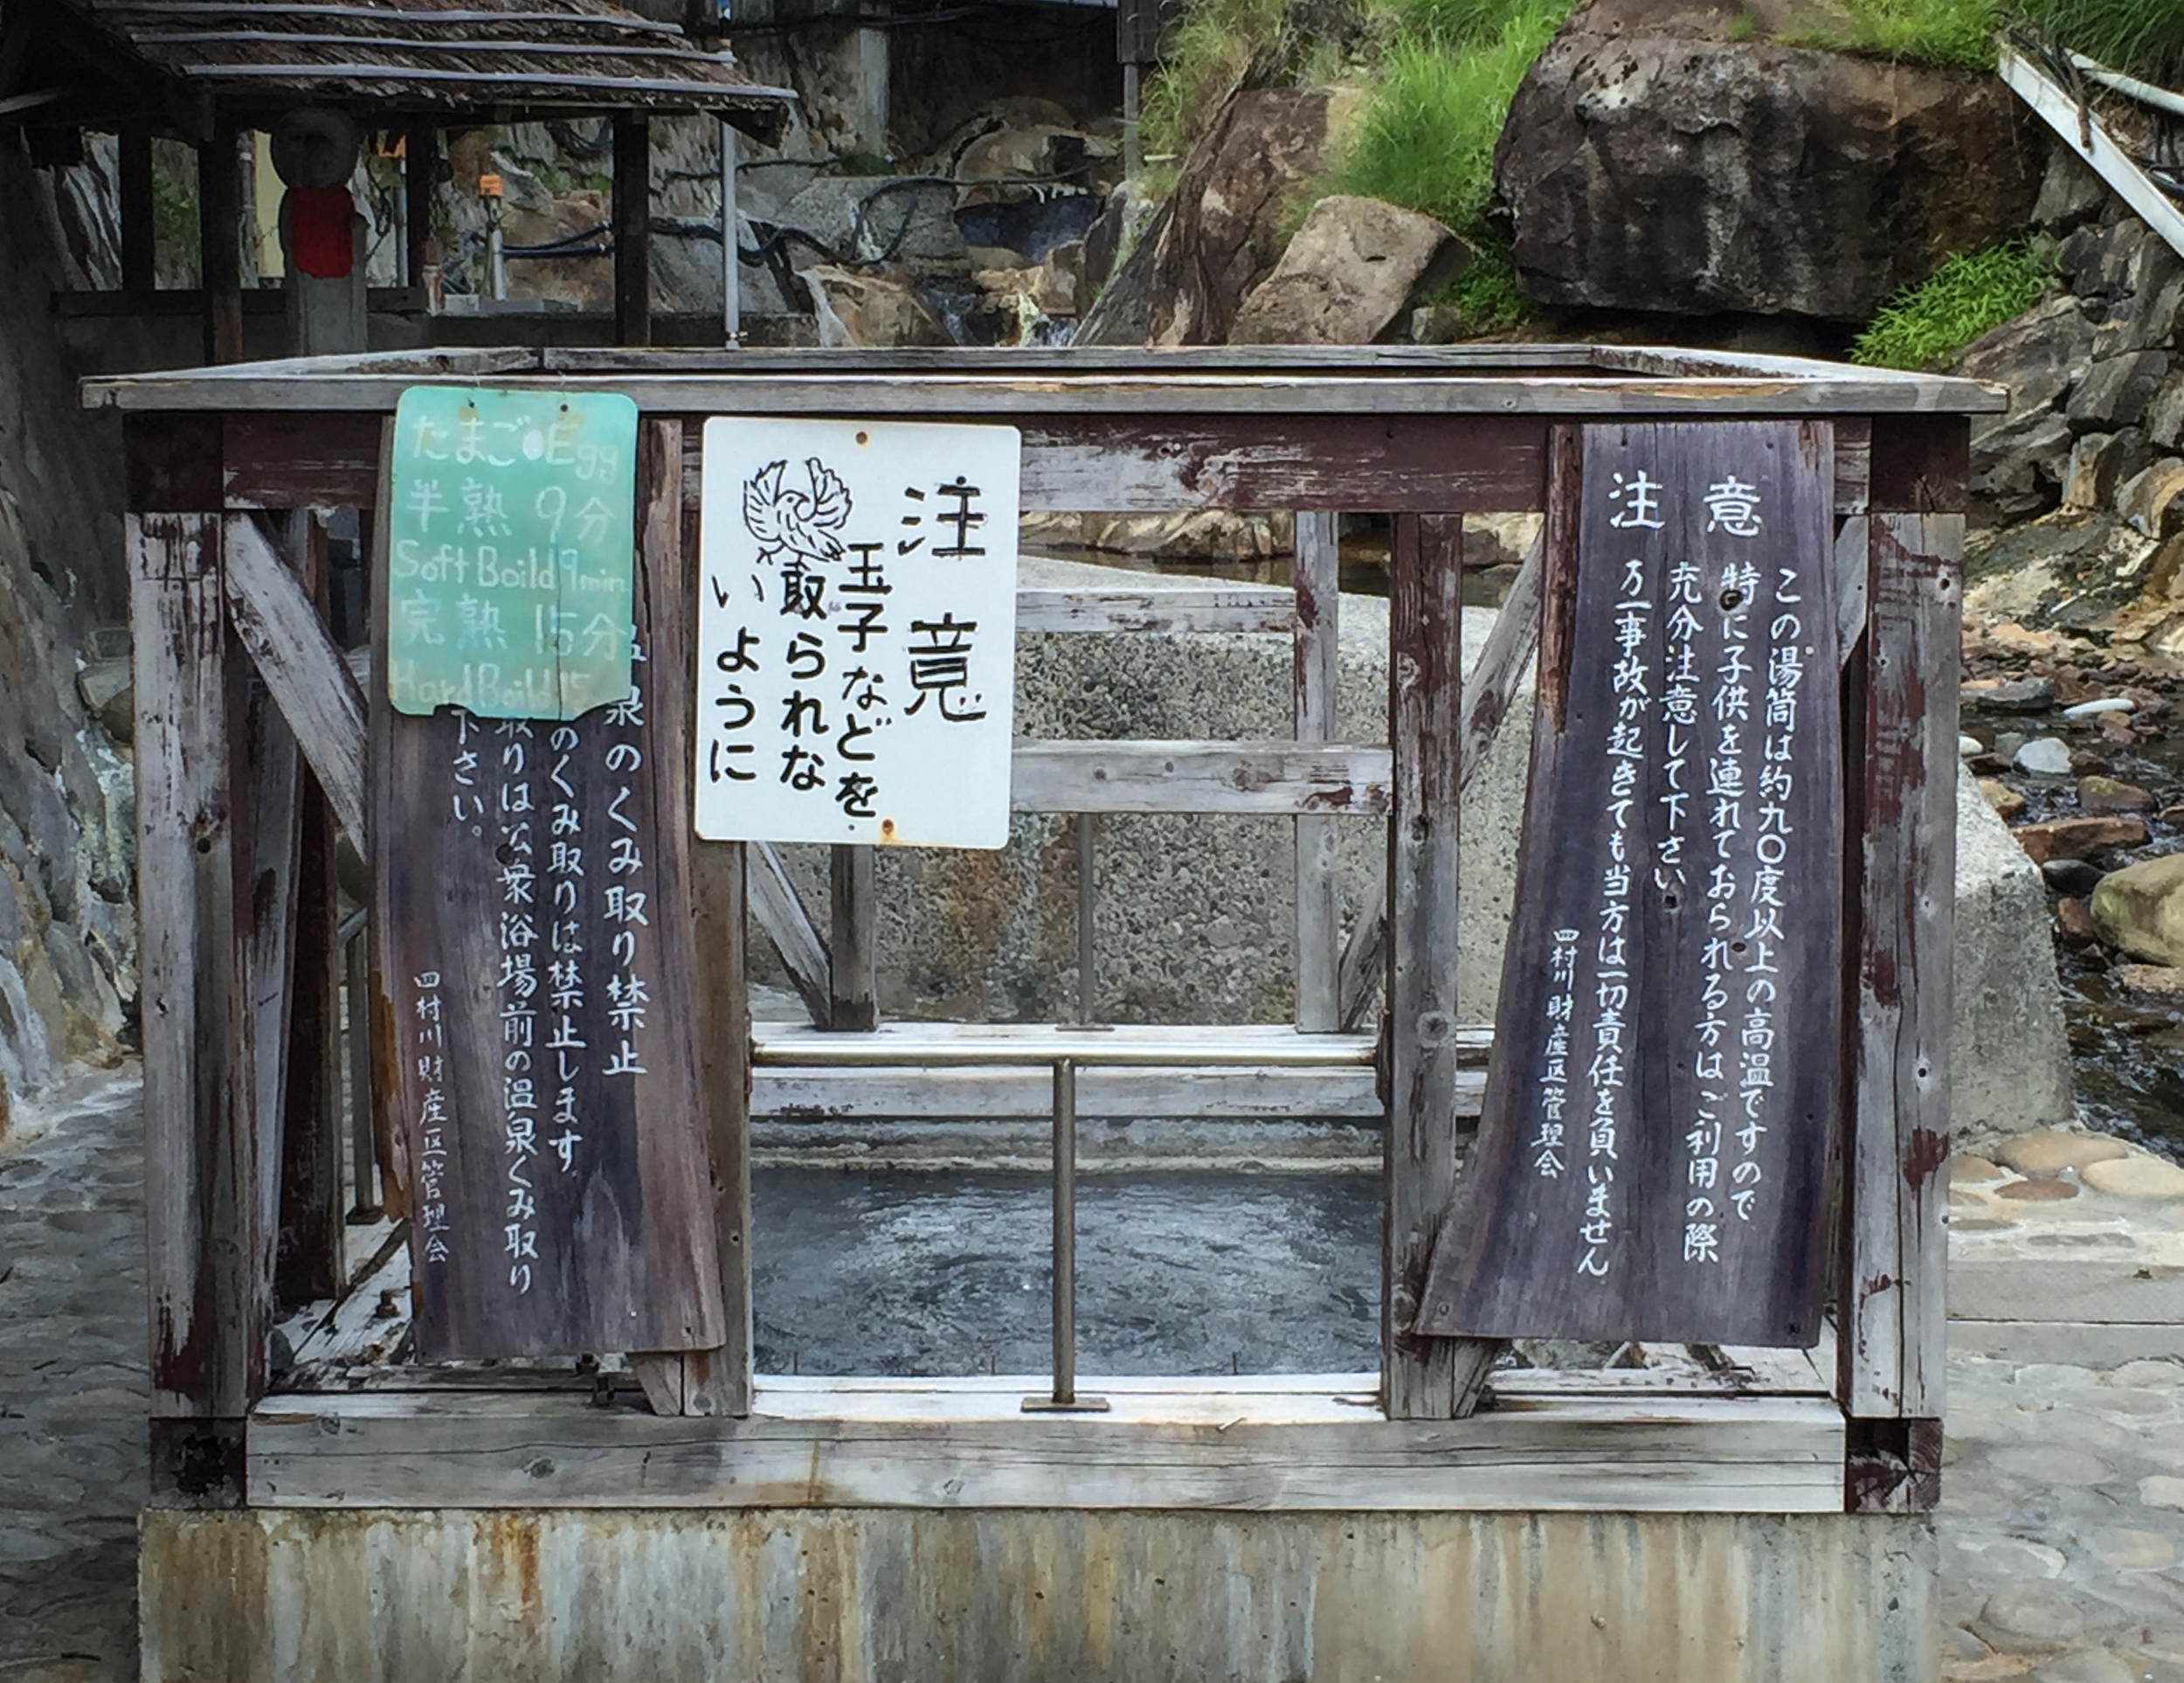 a Public onsen cooking basin, the hot springs water was so hot you could boil eggs in it! 